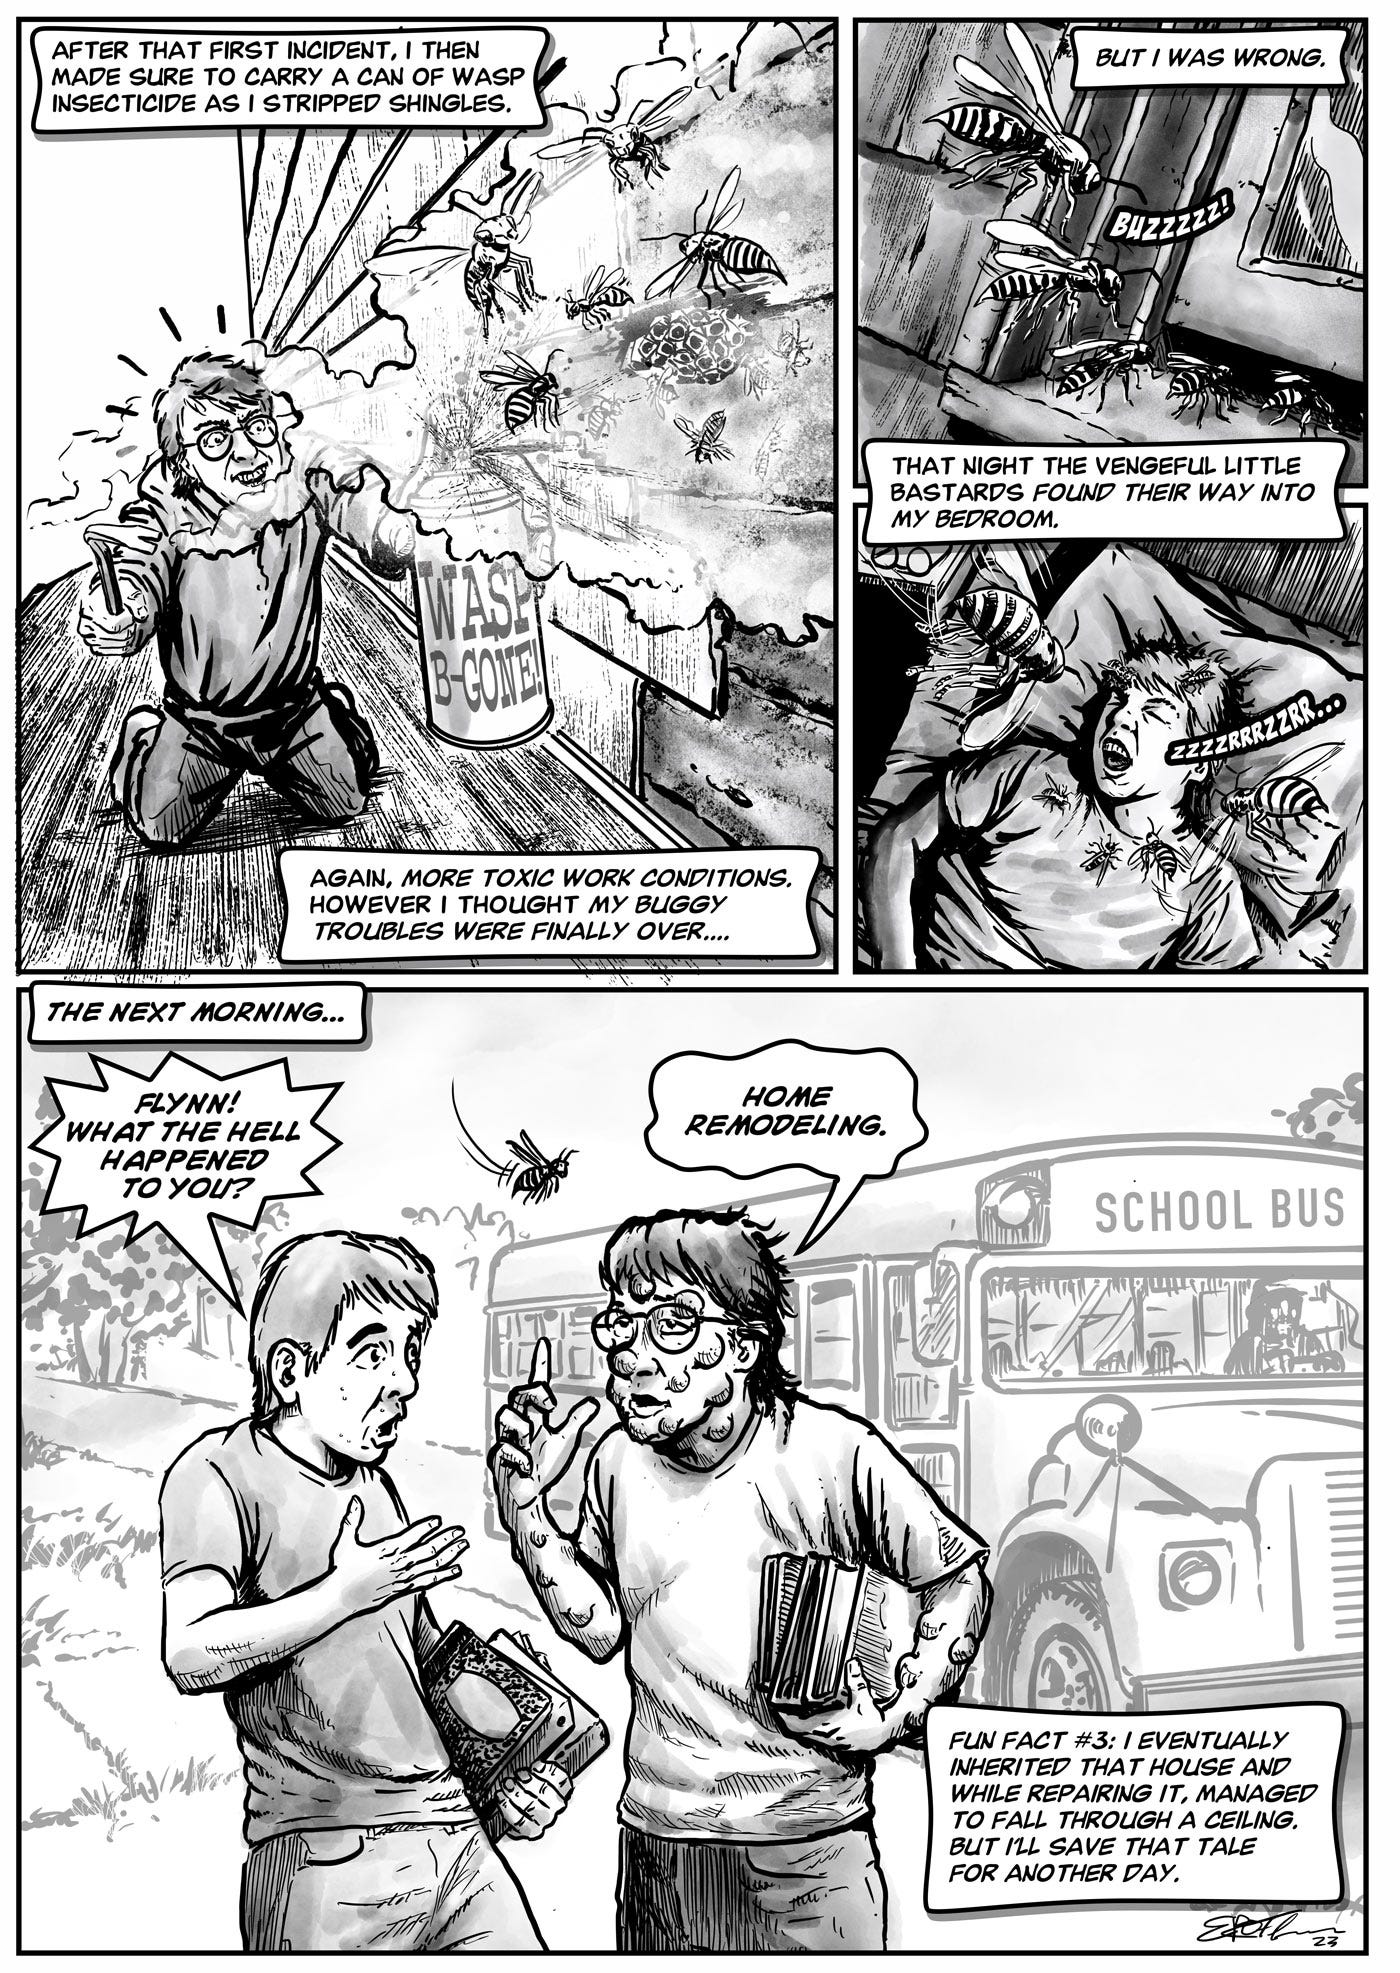 A wasps Tale page 3 comic by ER Flynn